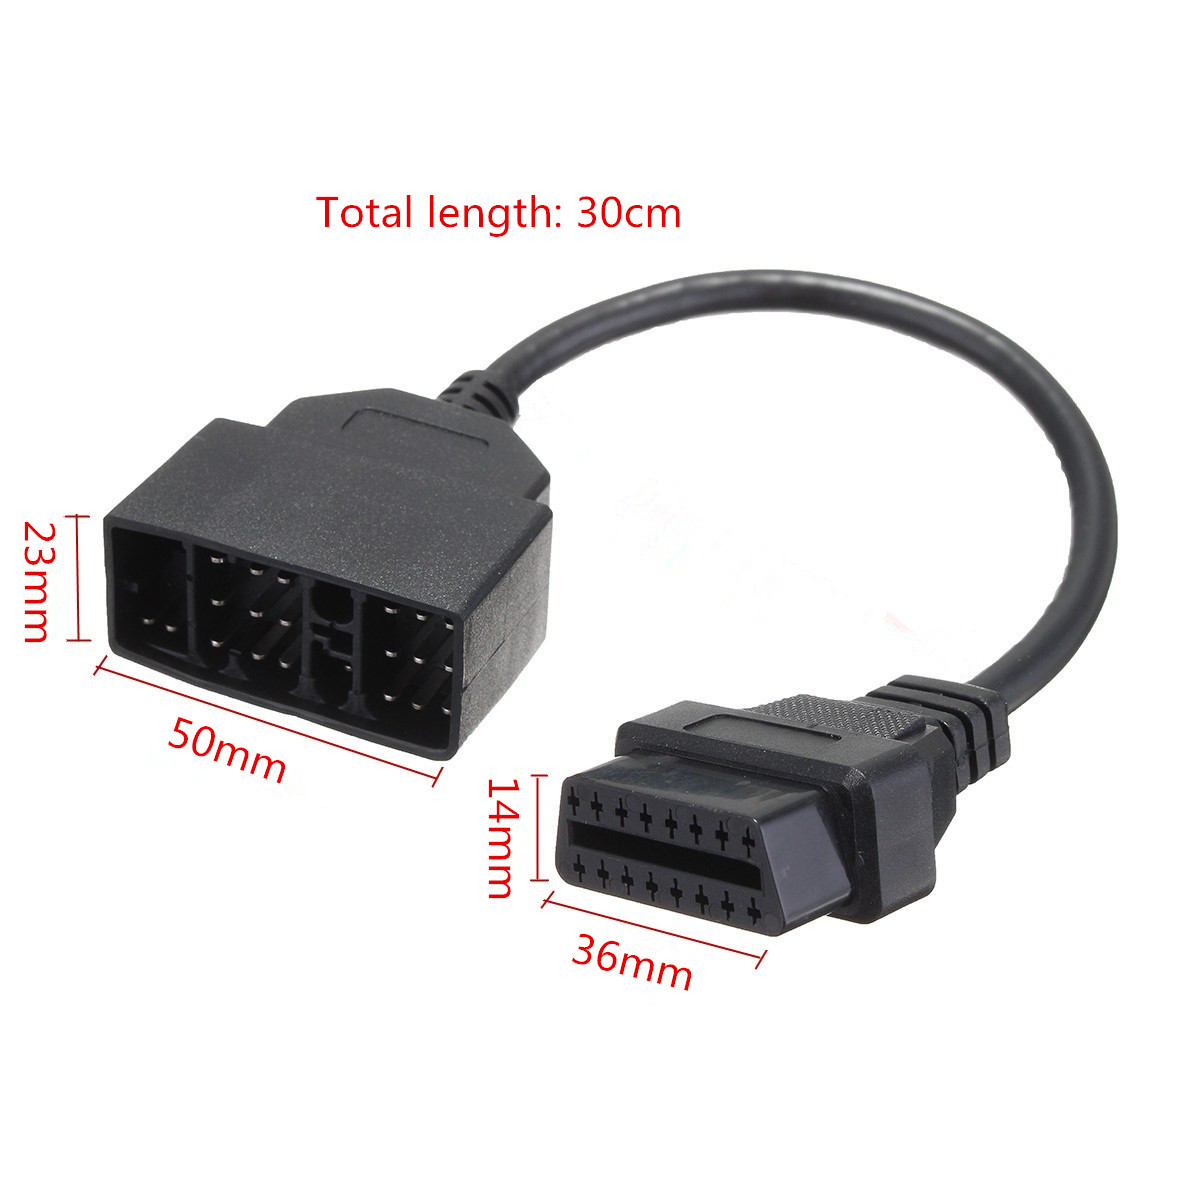 22-Pin-OBD1-to-16-Pin-OBD2-Convertor-Adapter-Cable-for-TOYOTA-Diagnostic-Scanner-1369958